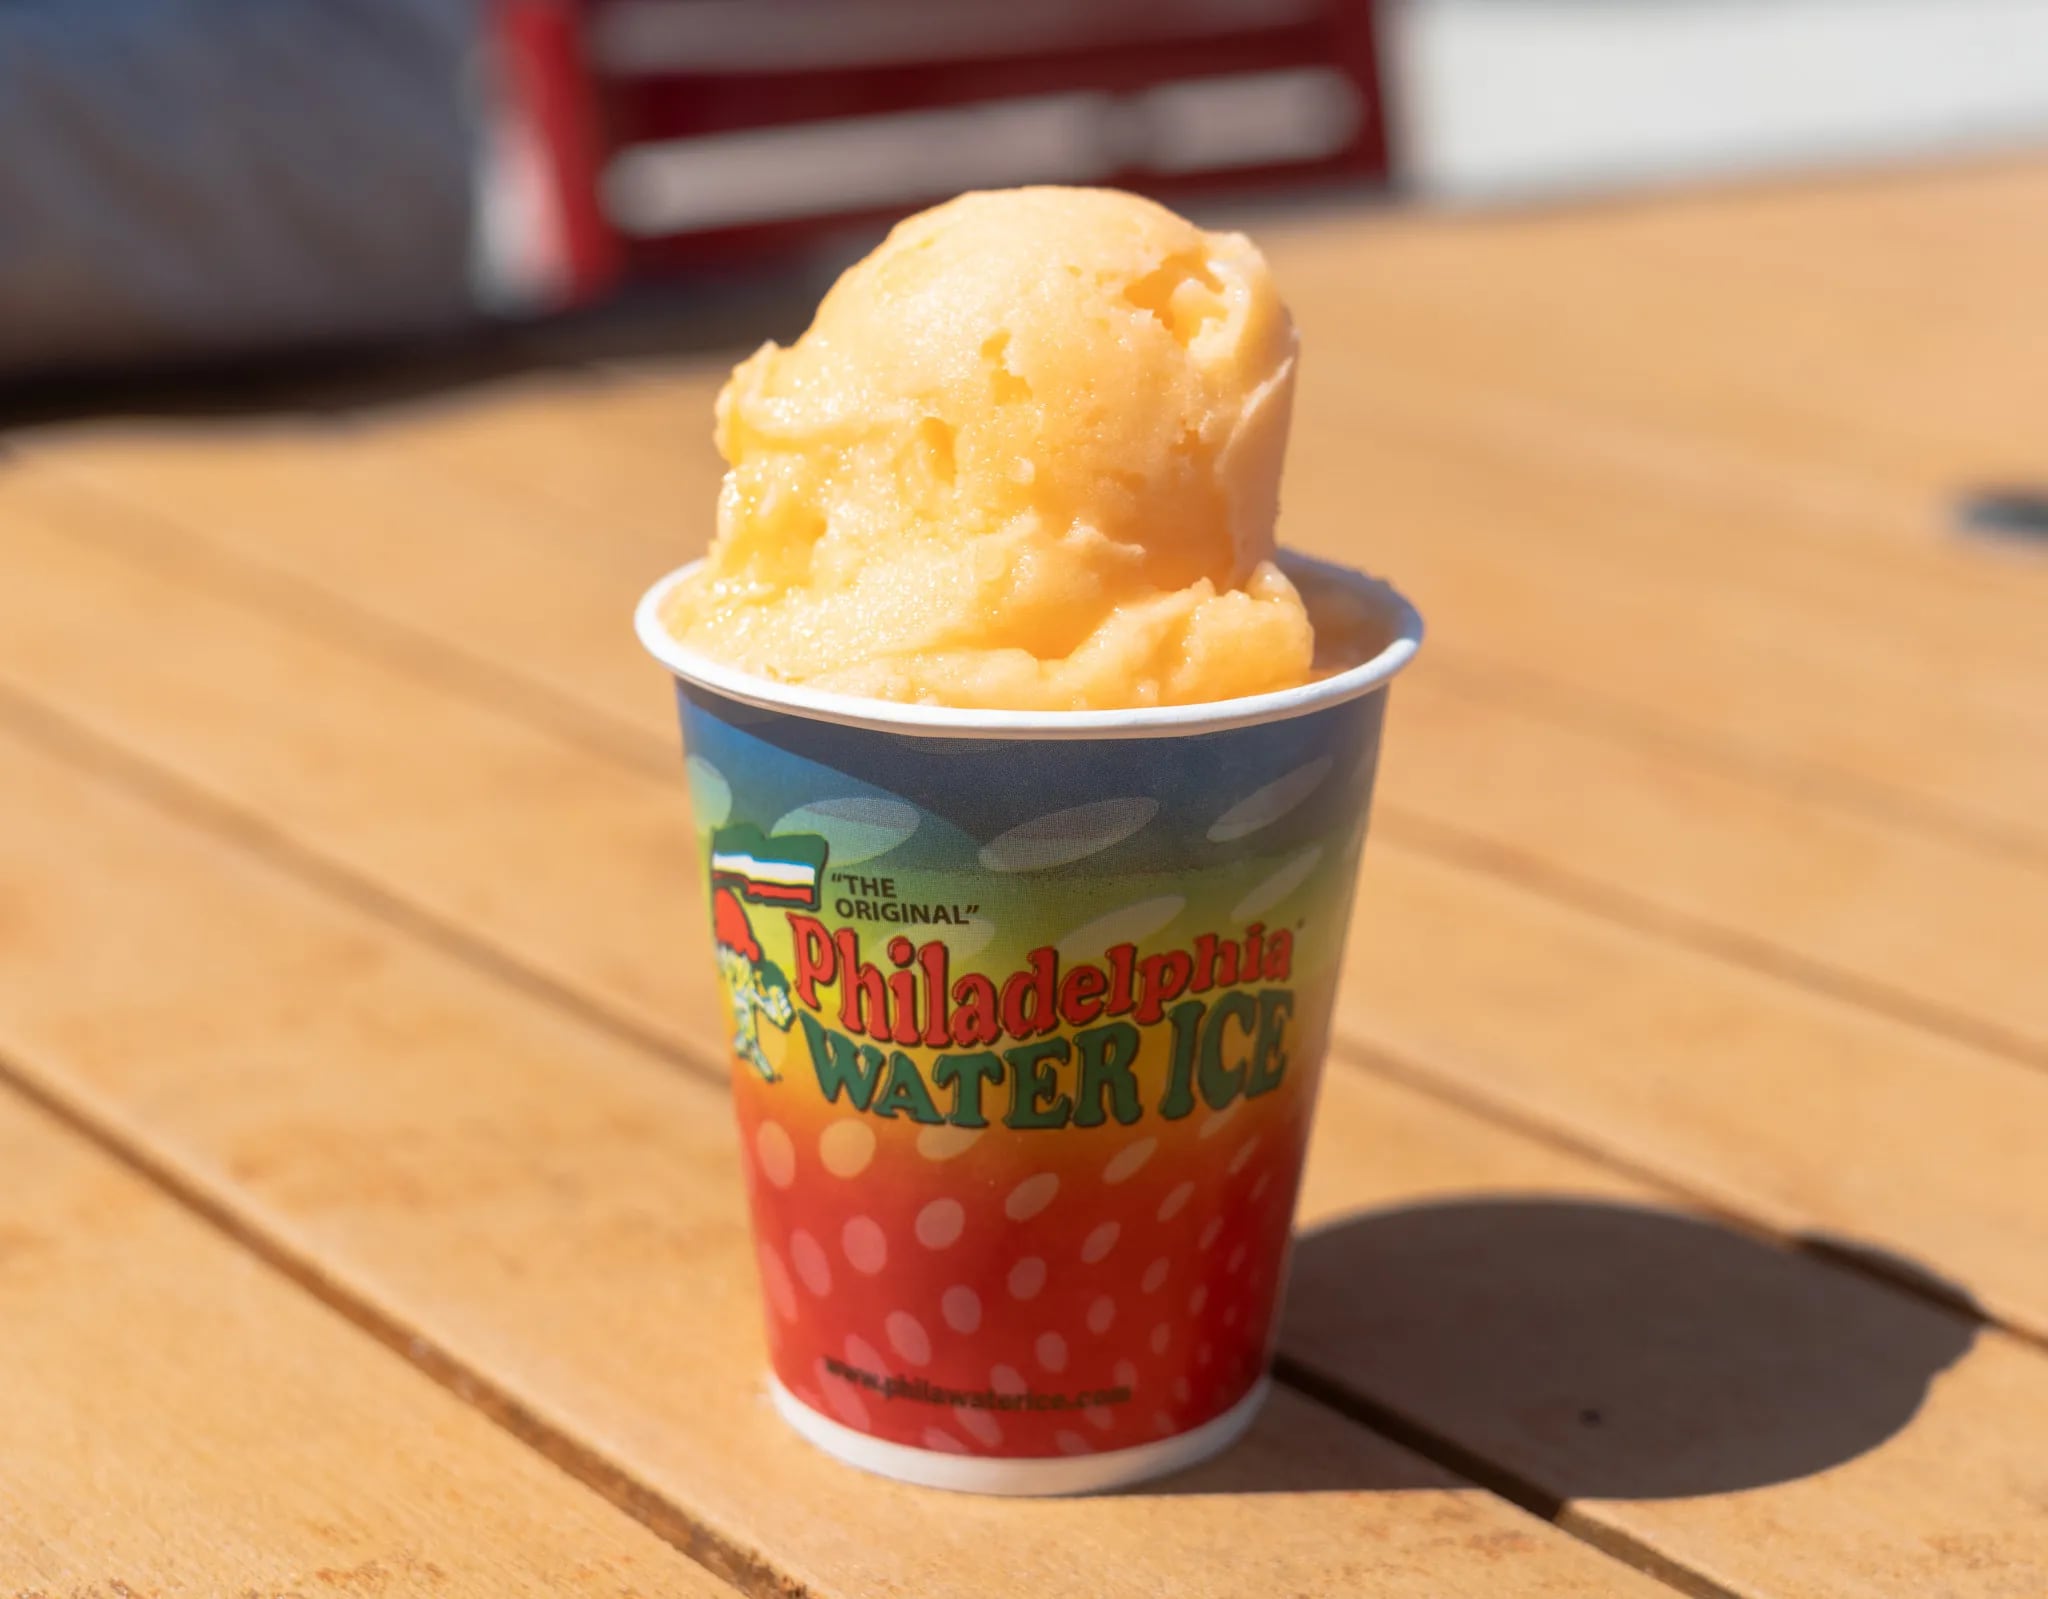 A cup of mango water ice from Philadelphia Water Ice concession stand at Citizens Bank Park.